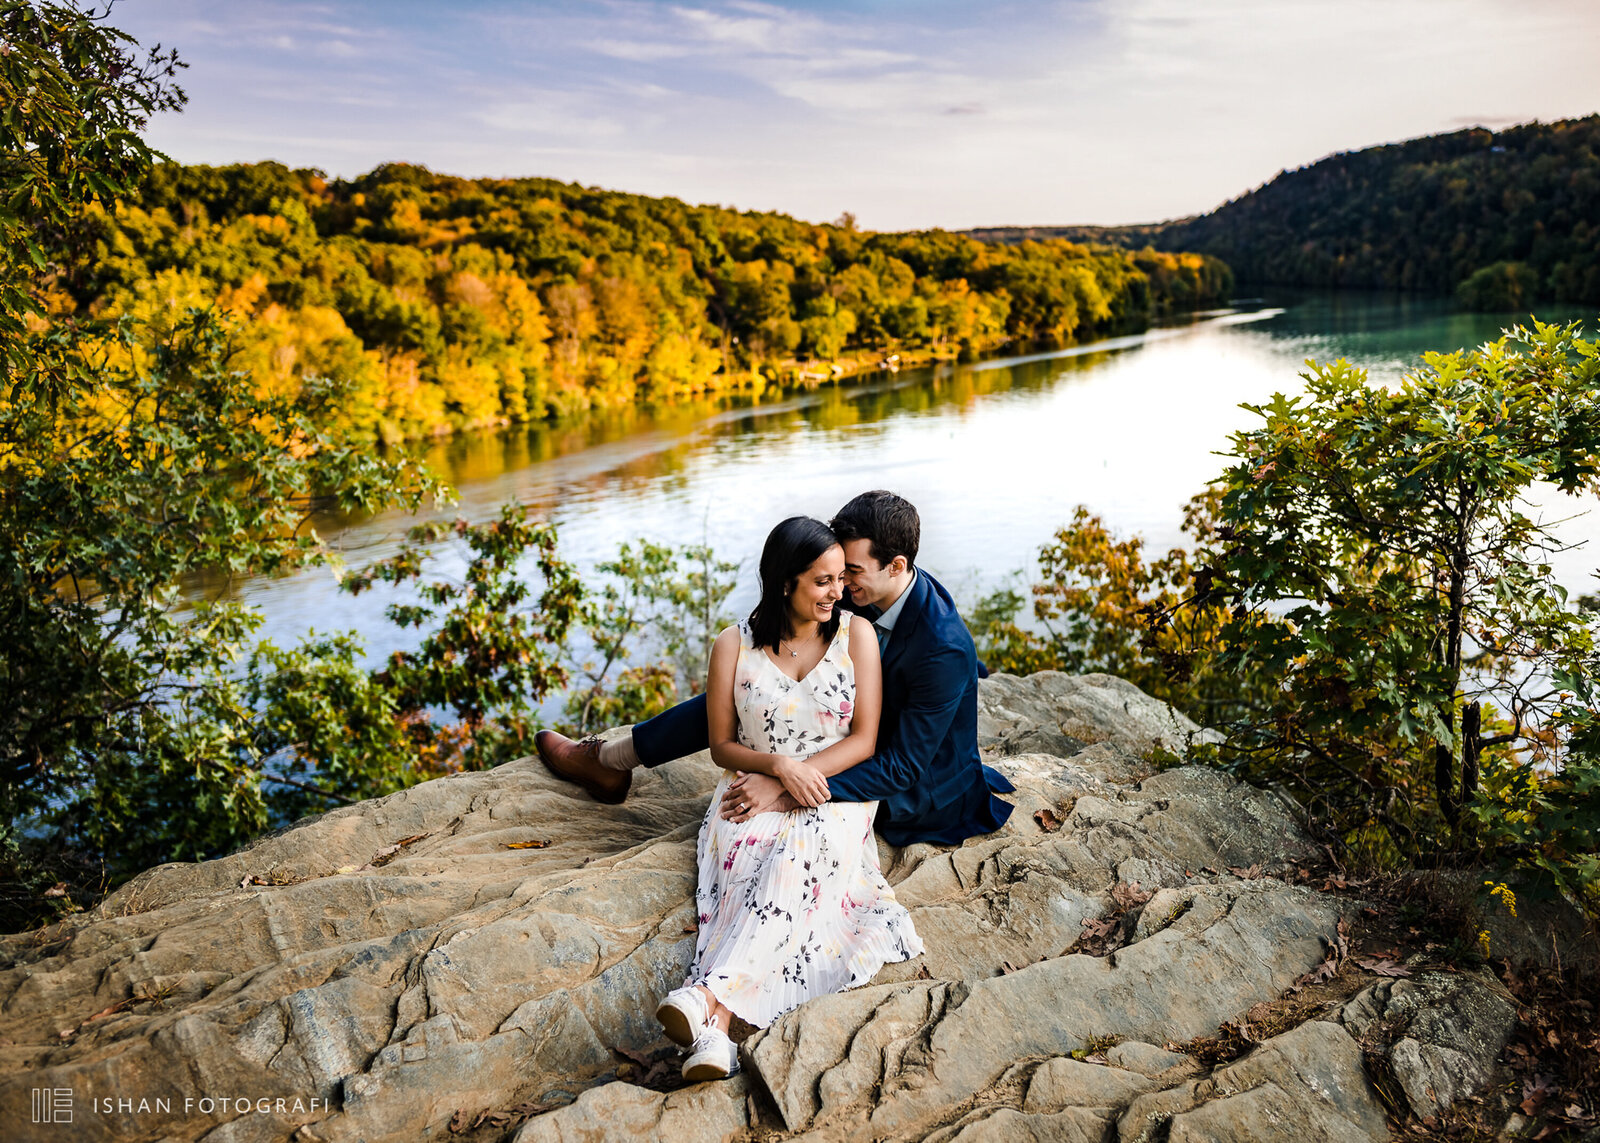 Ishan Fotografi is rated one of the top engagement photographers in Morris County, NJ.